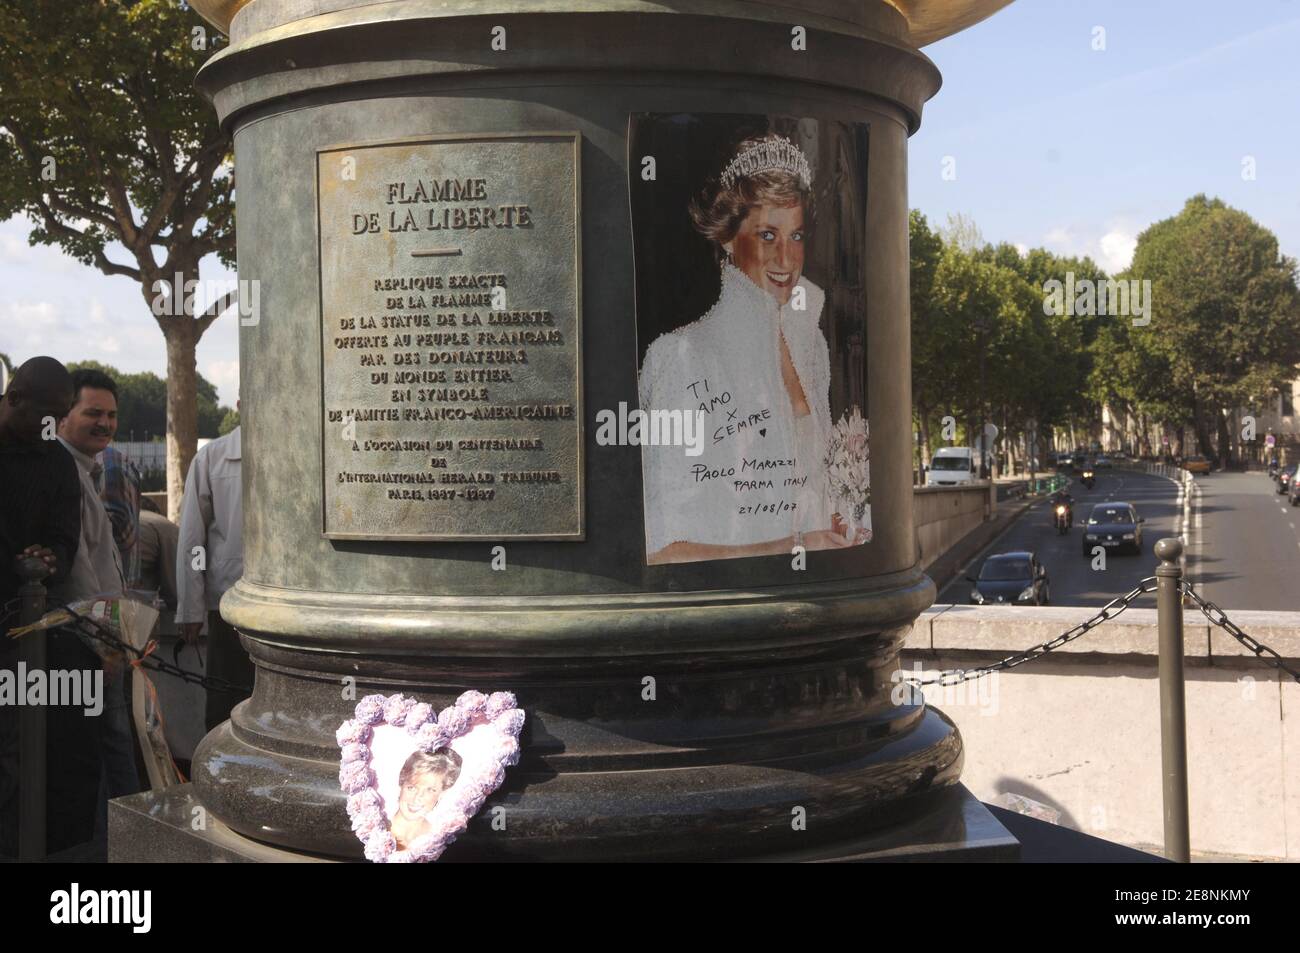 A handful of Diana fans gather at the Paris site where the princess's car crashed 10 years ago in Paris, France on August 31, 2007. The Alma tunnel, on the north bank of the River Seine, is a must-see spot for tourists who are drawn to the site where the 36-year-old Diana crashed shortly after midnight on 31 August 1997. Photo by Giancarlo Gorassini/ABACAPRESS.COM Stock Photo